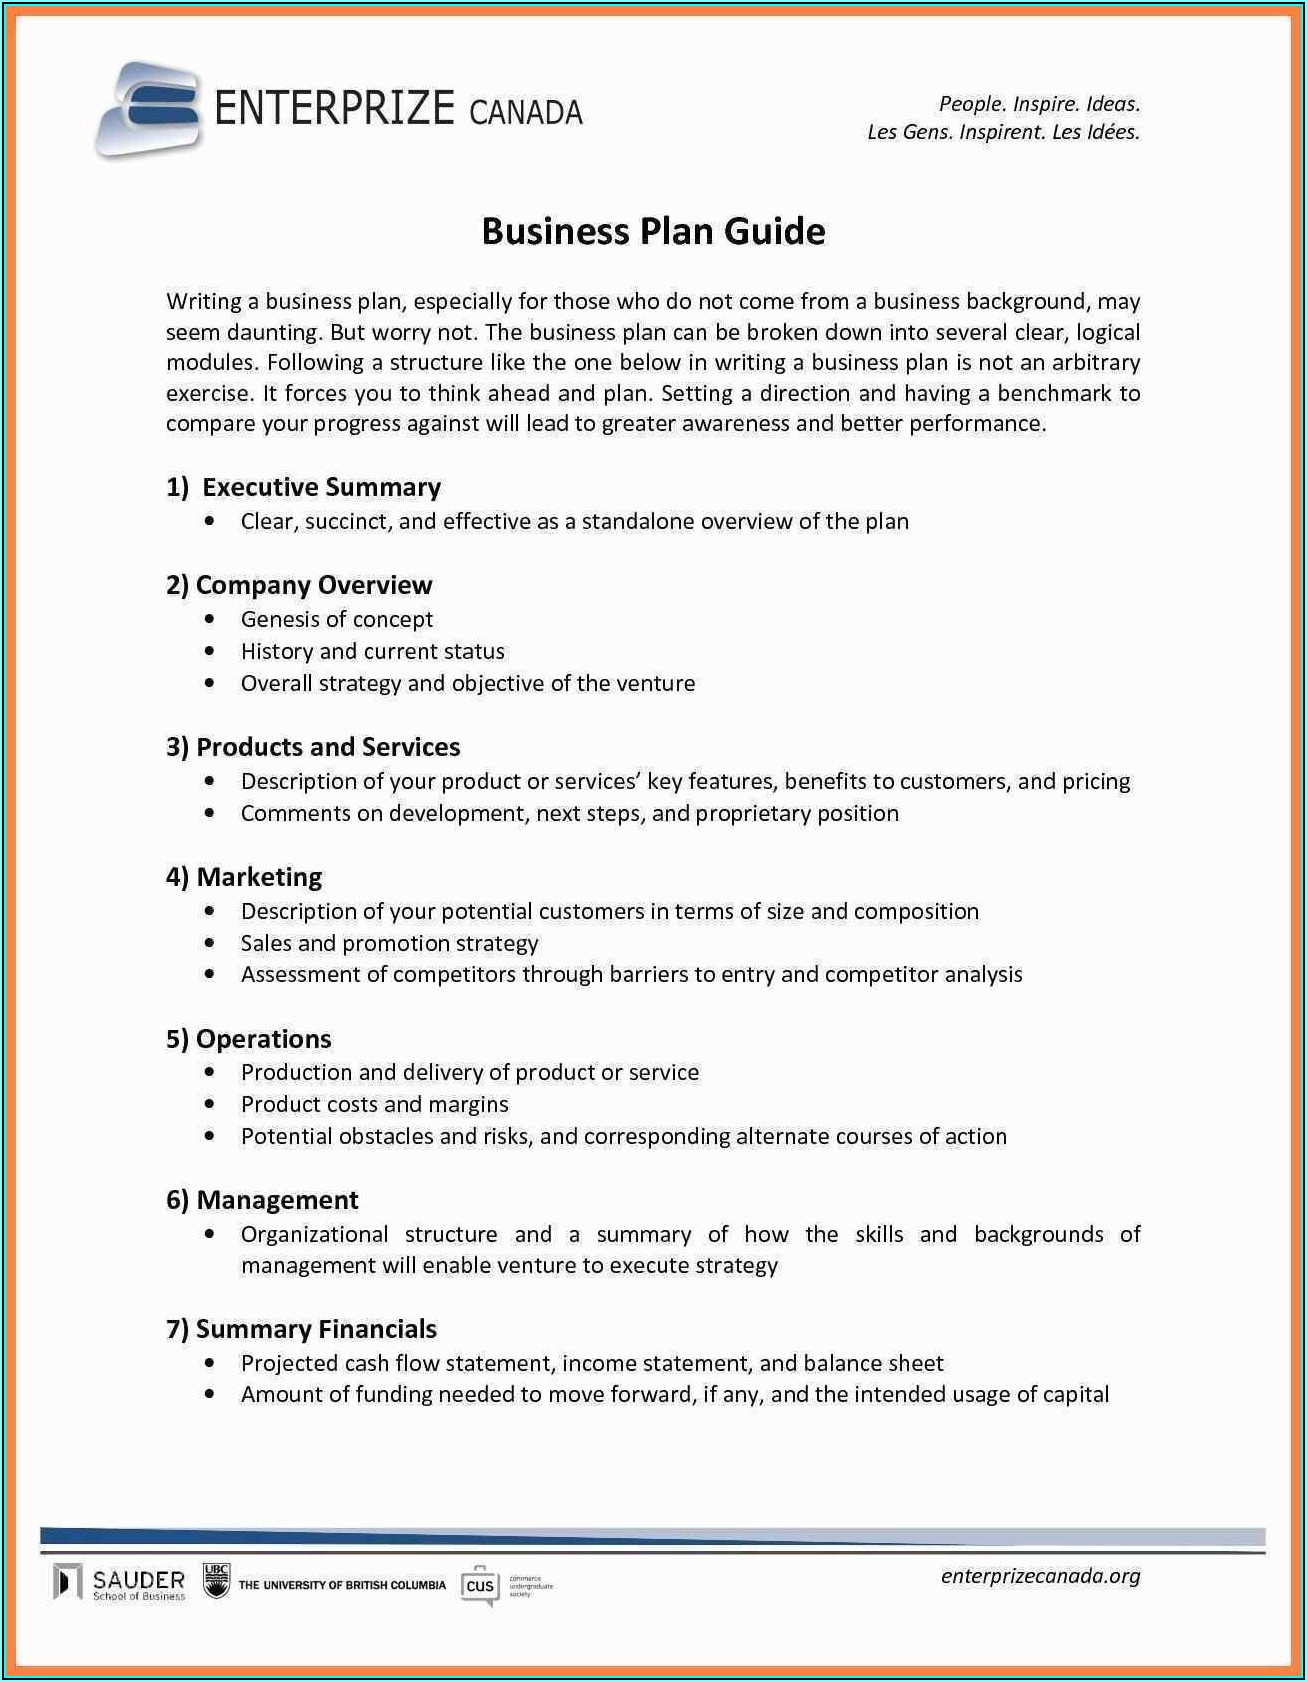 Simple Business Continuity Plan Template For Manufacturing